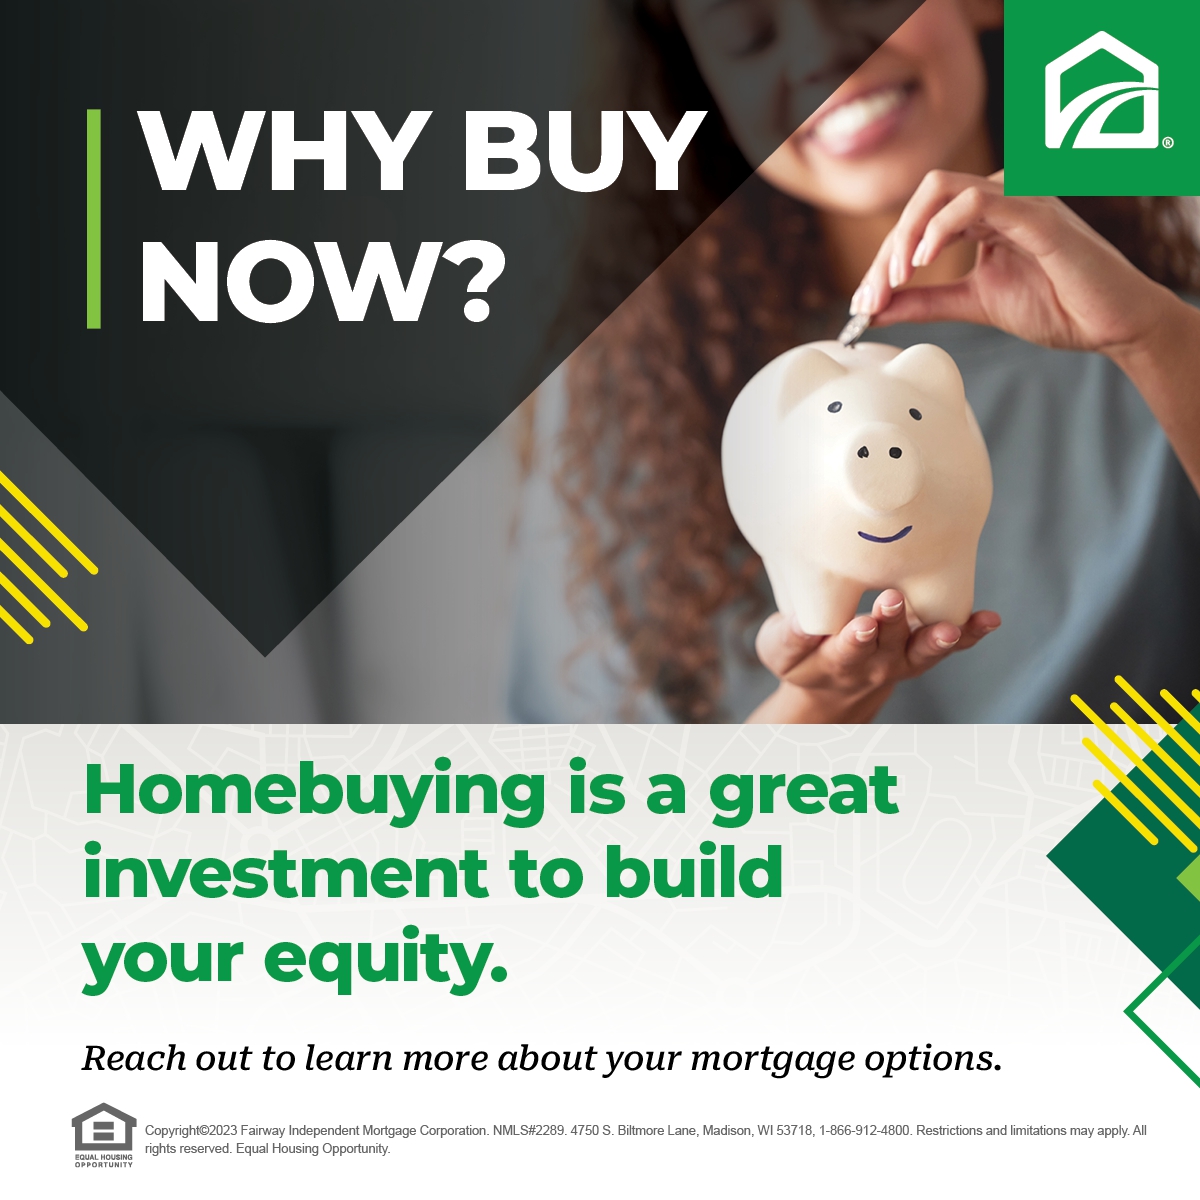 Just because interest rates are higher than usual doesn’t mean it’s not still a great time to buy! There are plenty of benefits of purchasing a new home in this market.  #jerryloanguy #Homeownership #BuyNow #RealEstateOpportunity #DreamHome #FinancialFreedom #LowInterestRates